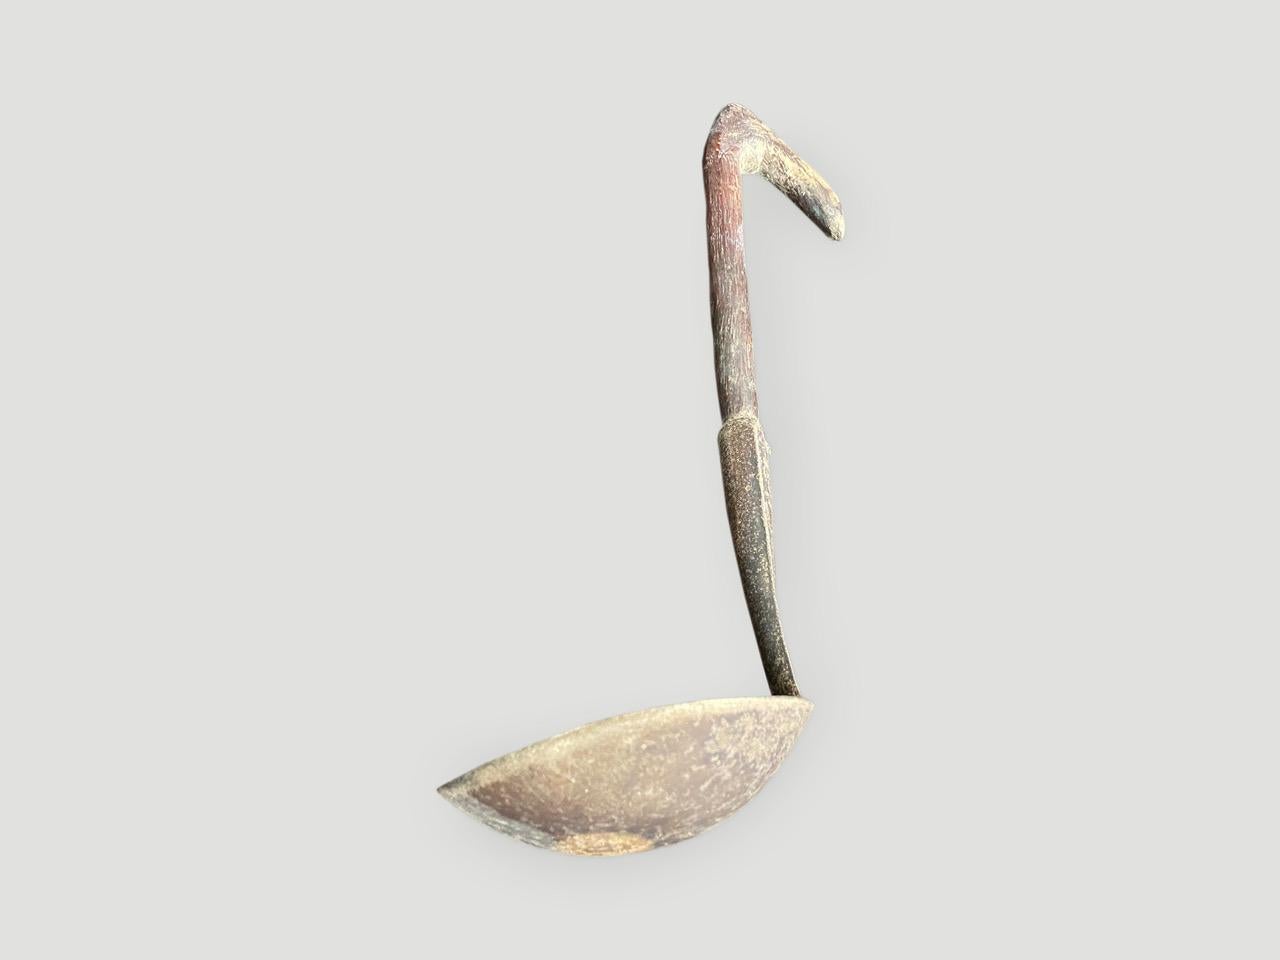 Tribal Andrianna Shamaris Antique Hand Antique Wooden Ladle For Sale